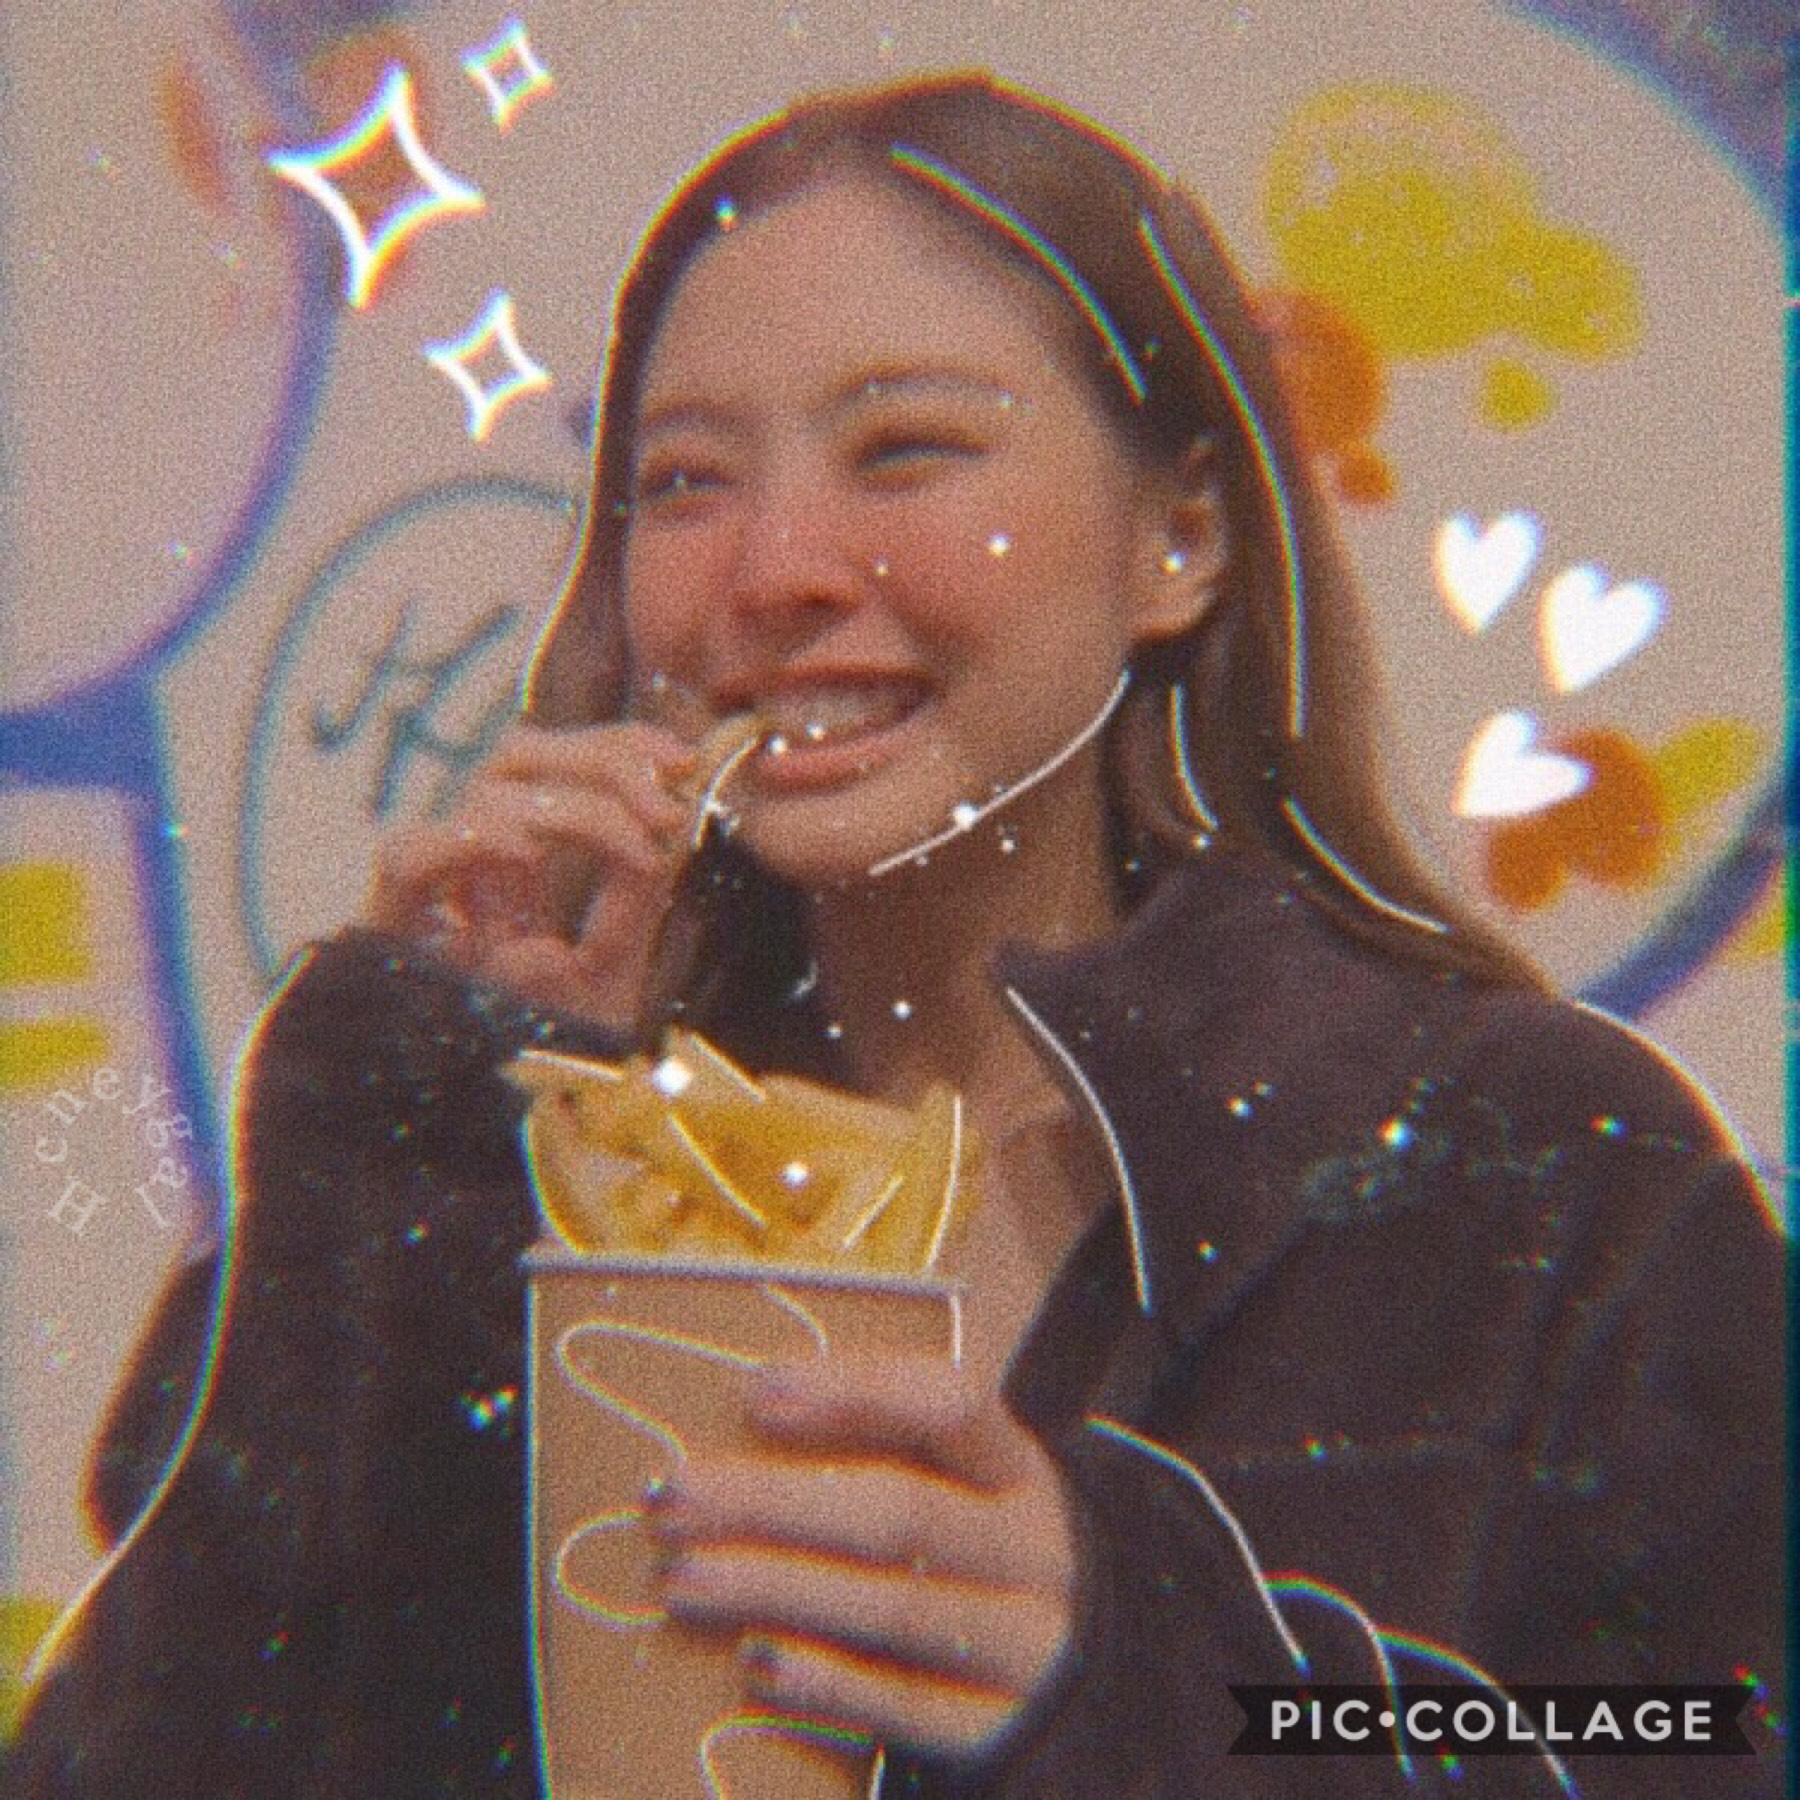 ˗ˏˋ 𝑡𝑎𝑝 𝑚𝑒 ˎˊ˗
⁺ I’m back...again but this time w/ ab edit of soft Jennie ♡
⁺ little update - school starts next week :(( and I don’t even know my schedule 
⁺ tysm for all the love 